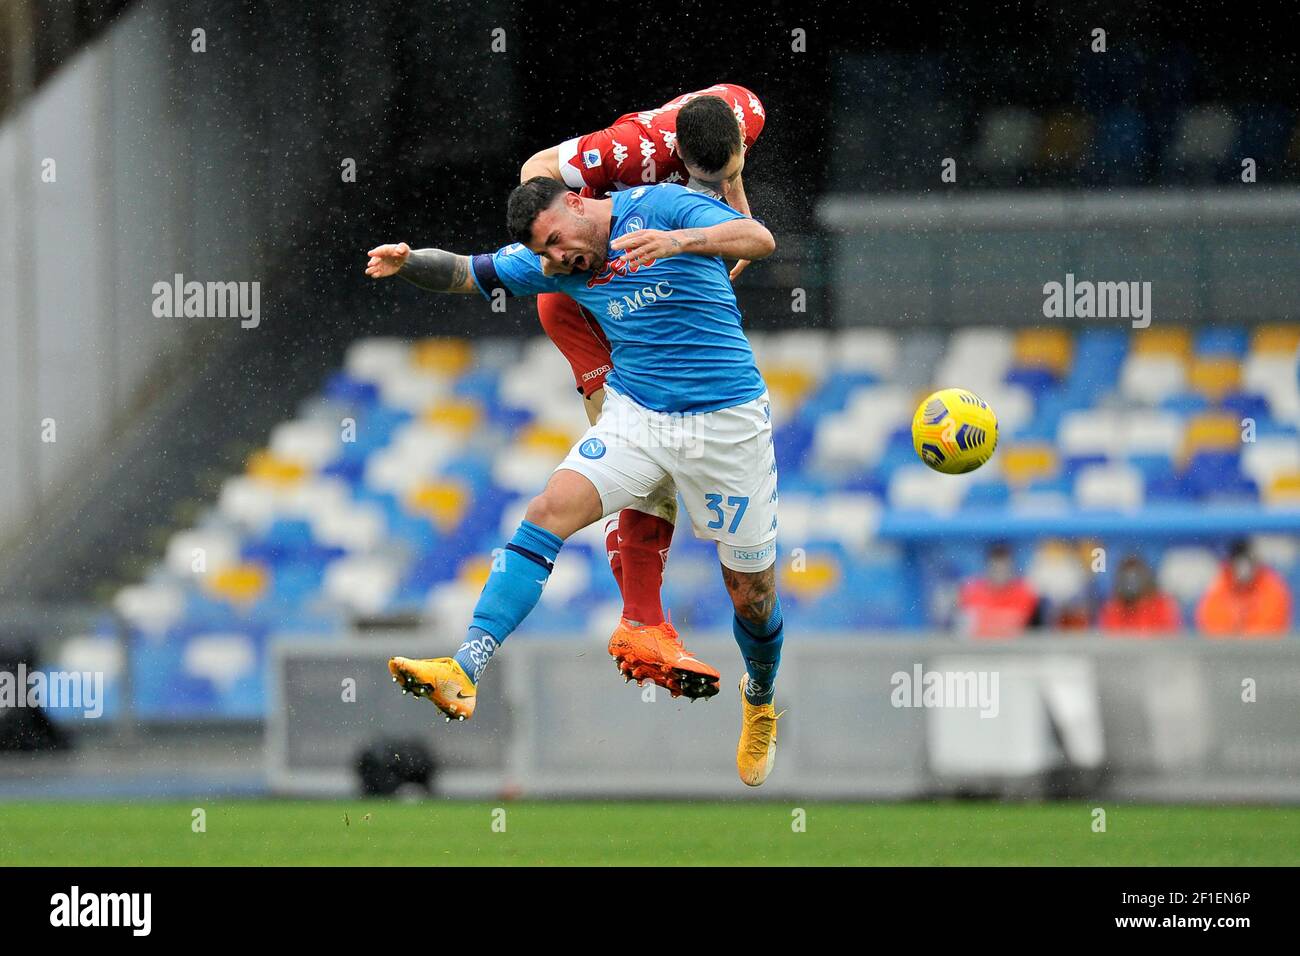 Andrea Petagna player of Napoli, during the match of the Italian football league Serie A between Napoli vs Fiorentina final result 5-0, match played a Stock Photo